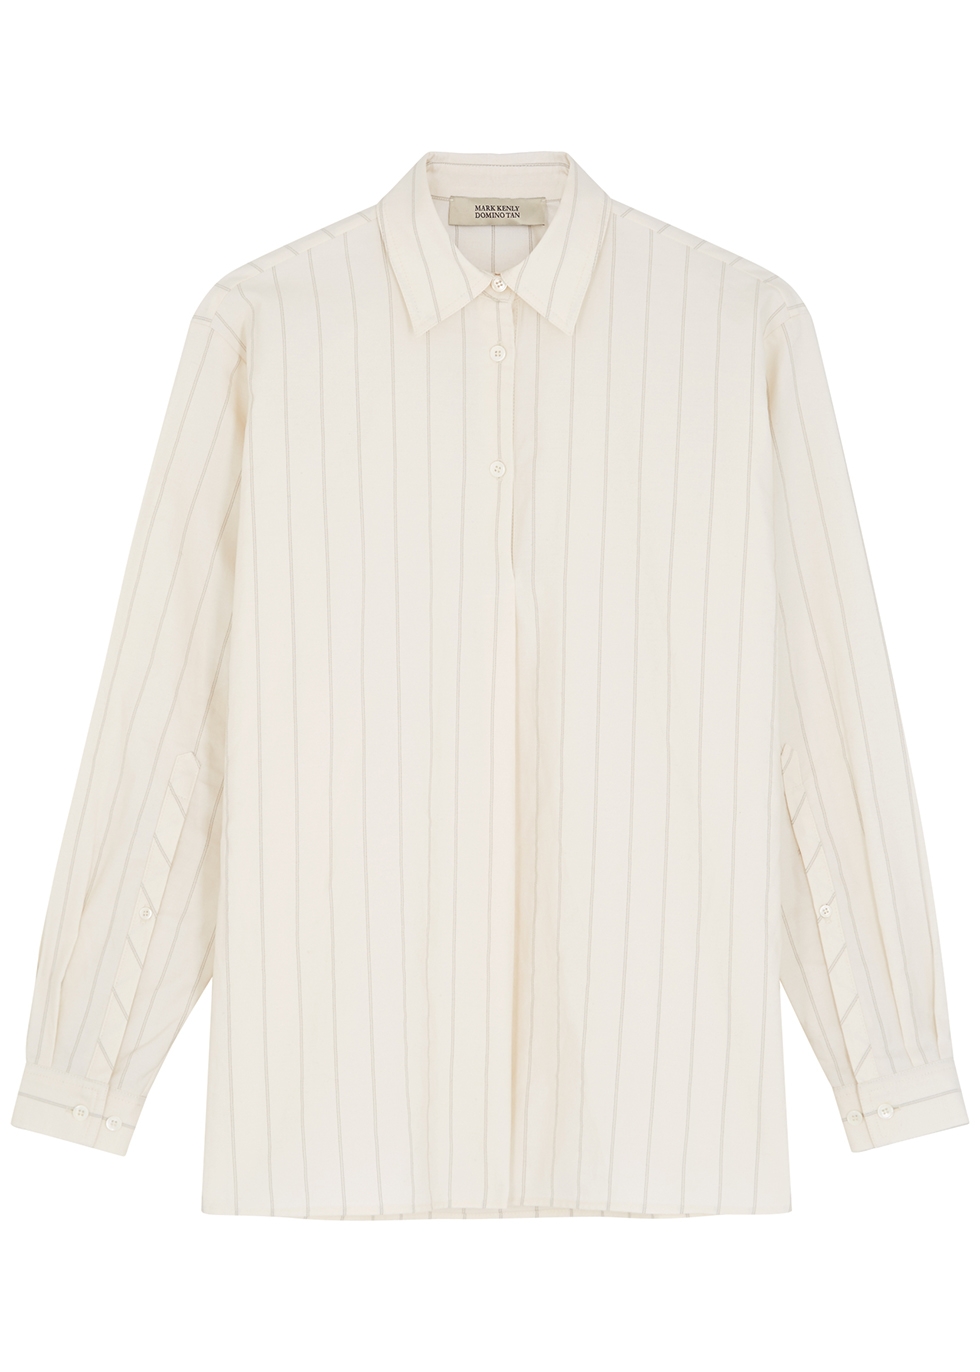 Mark Kenly Domino Tan Sonia striped cotton-blend shirt